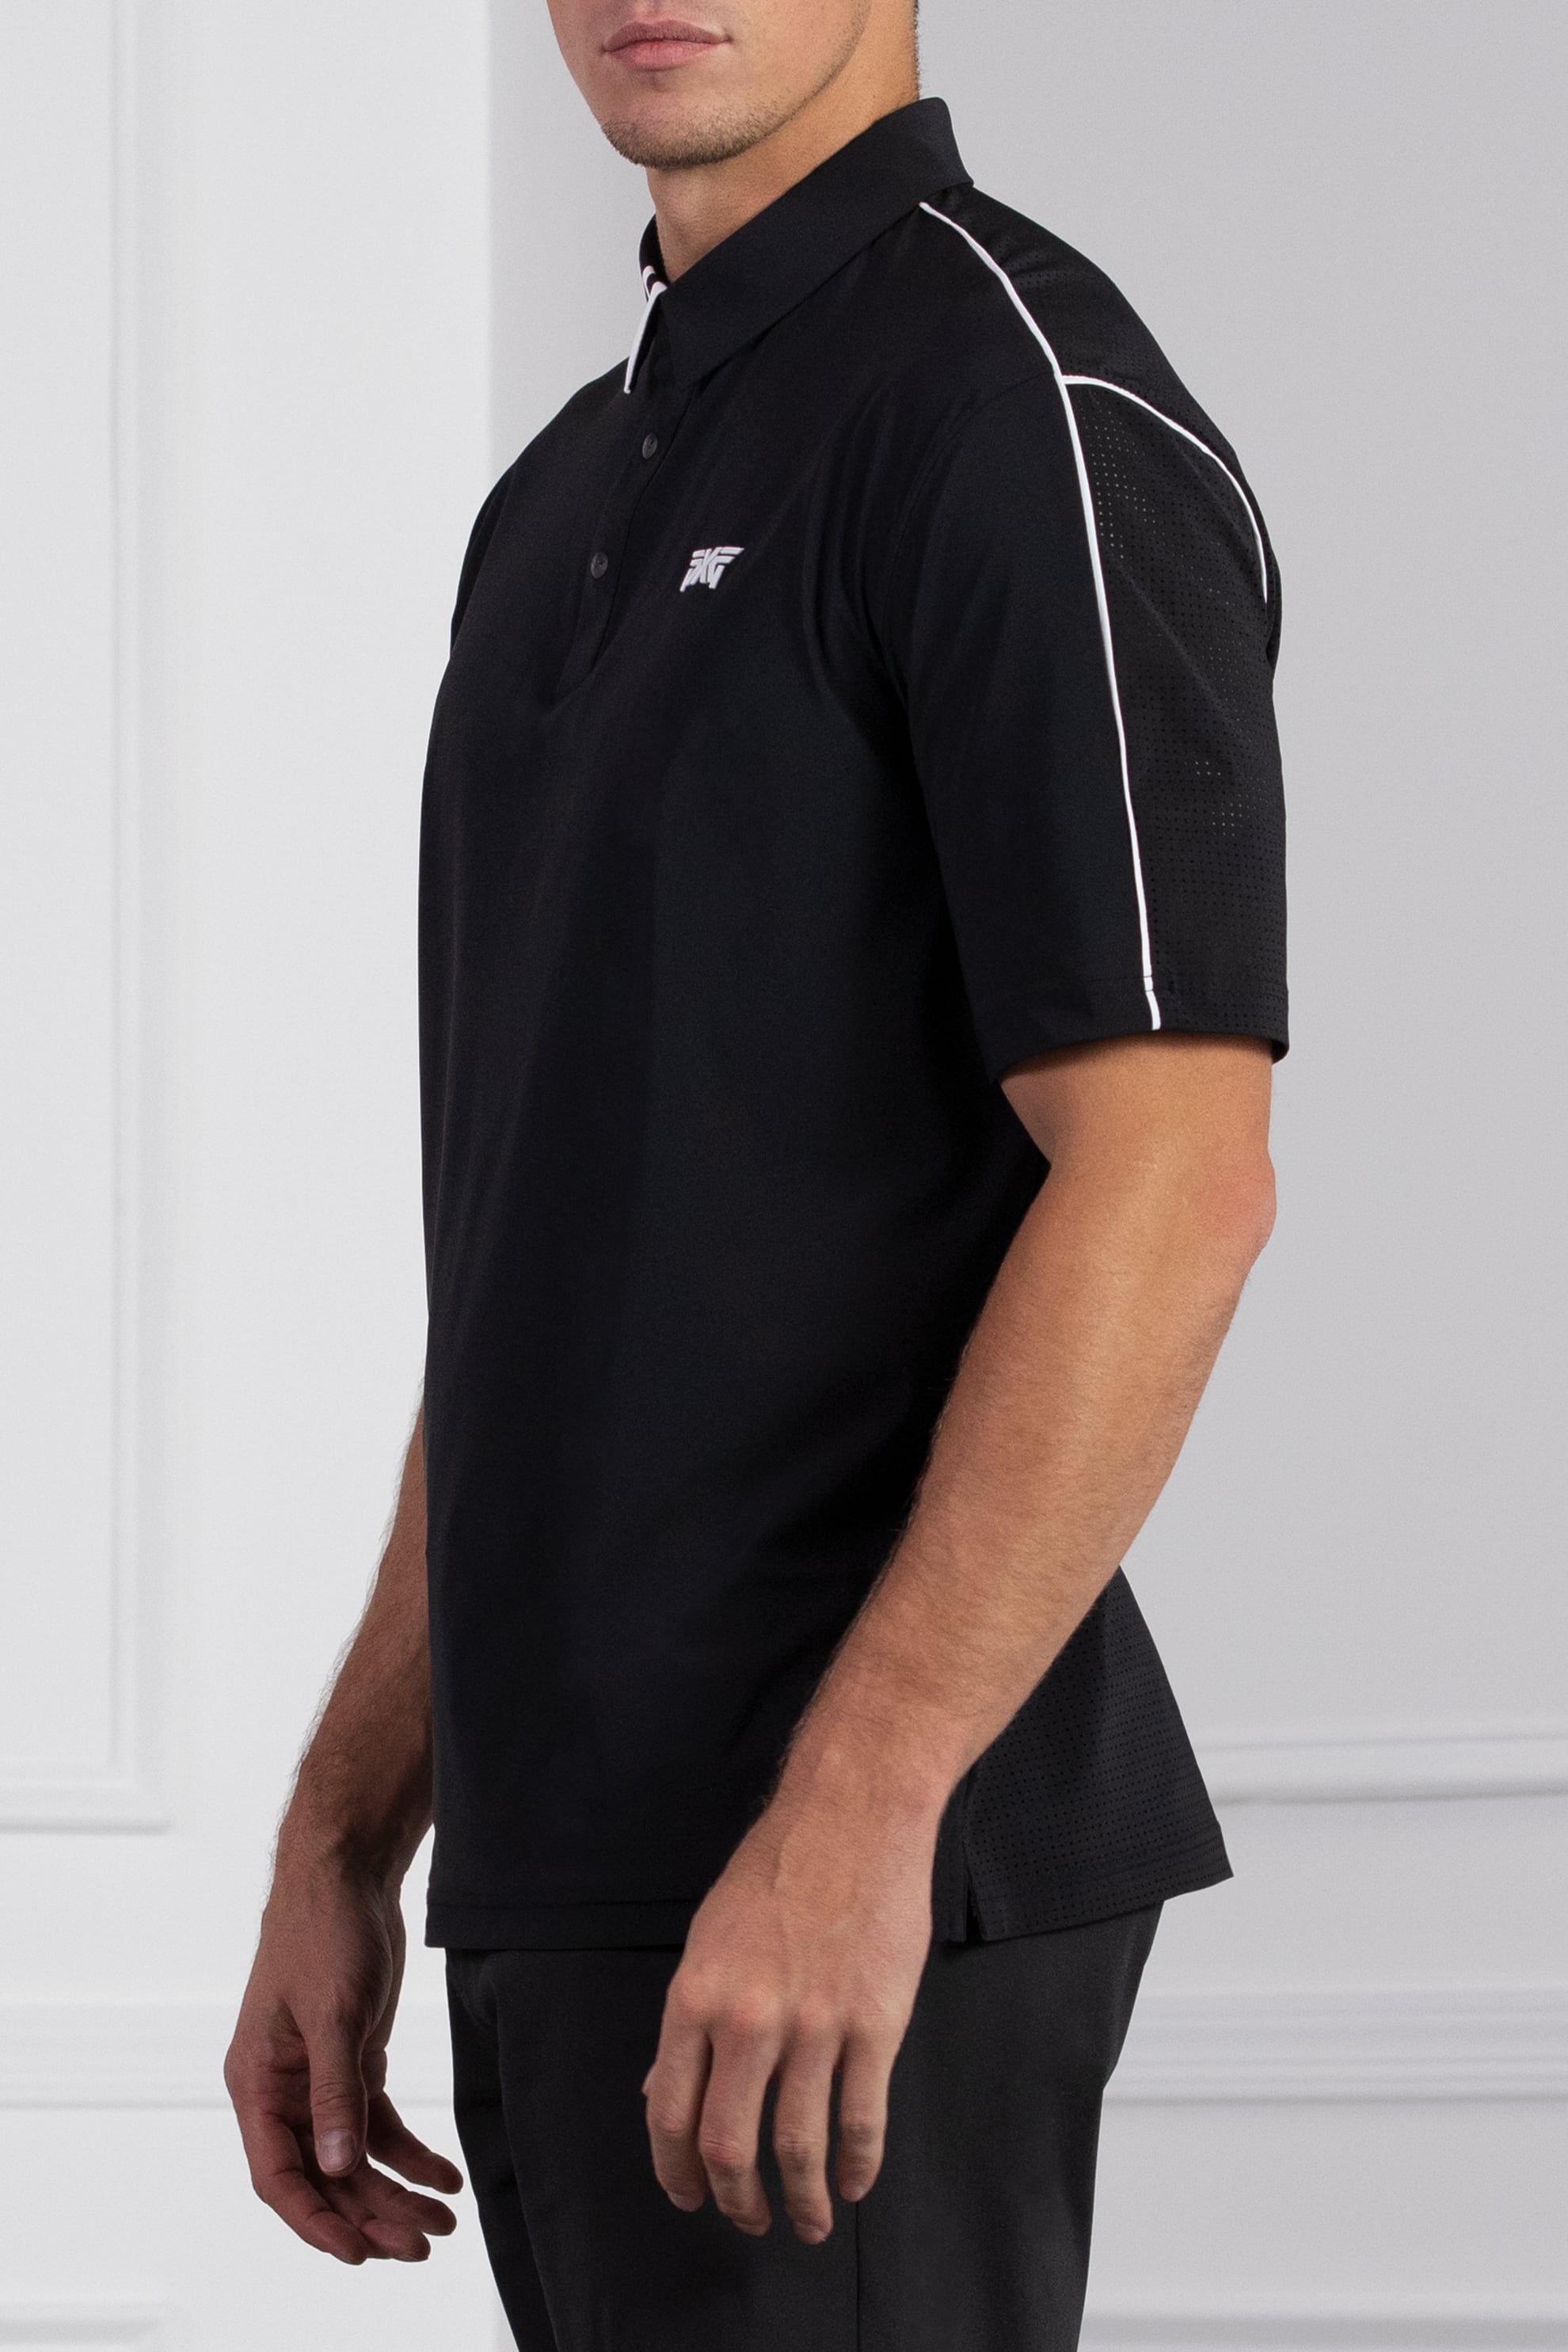 Golf Clubs PXG Apparel, Fineline Comfort and Accessories | Polo at Gear, the Quality Highest Fit Shop Golf